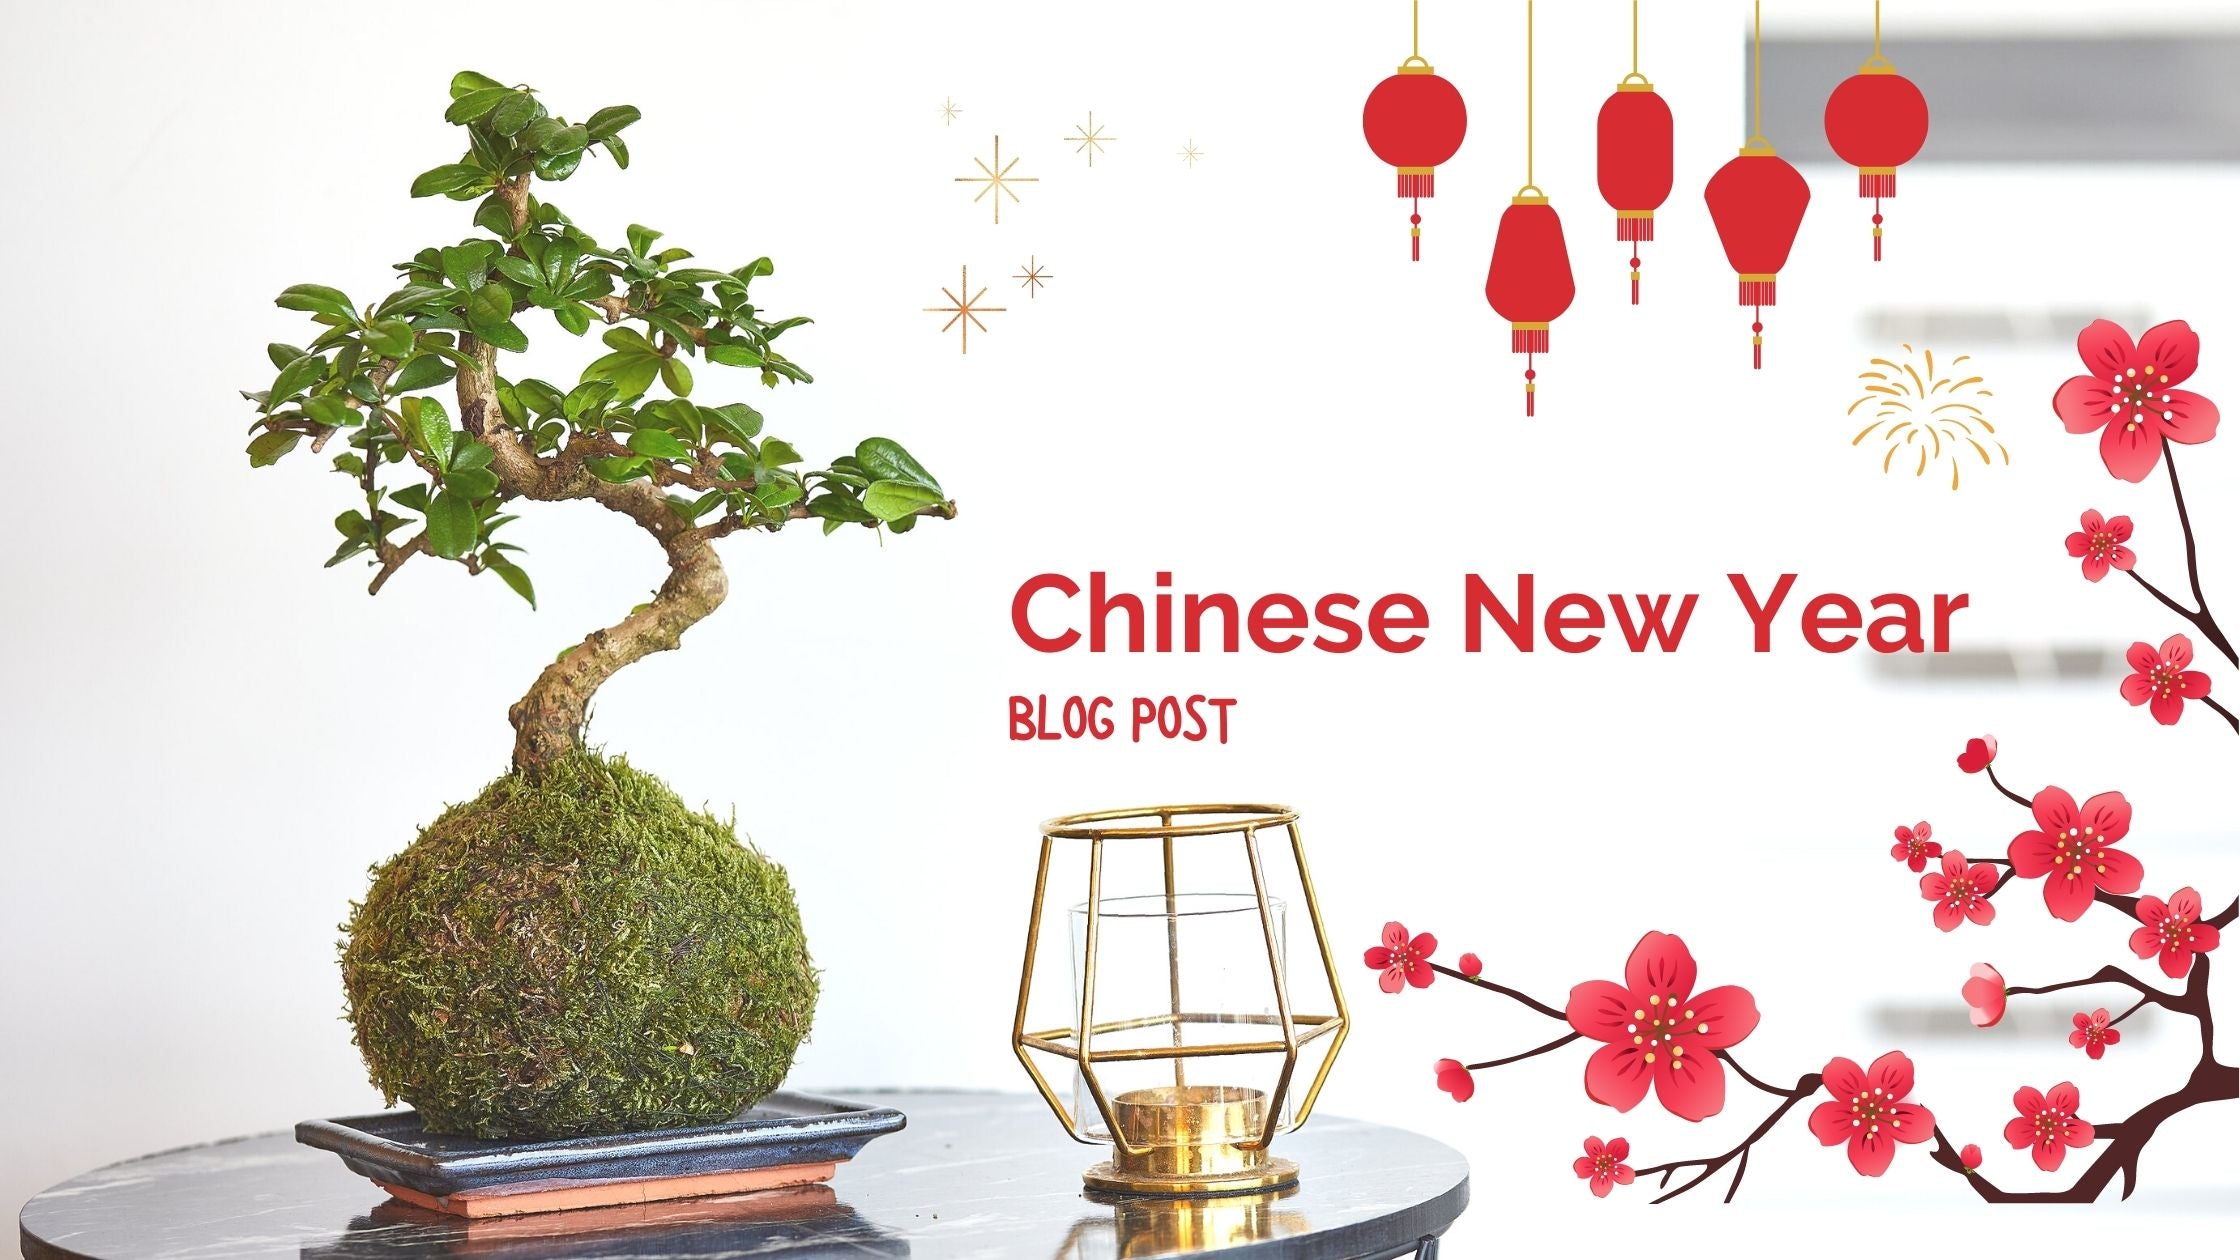 Bonsai and the Chinese New Year